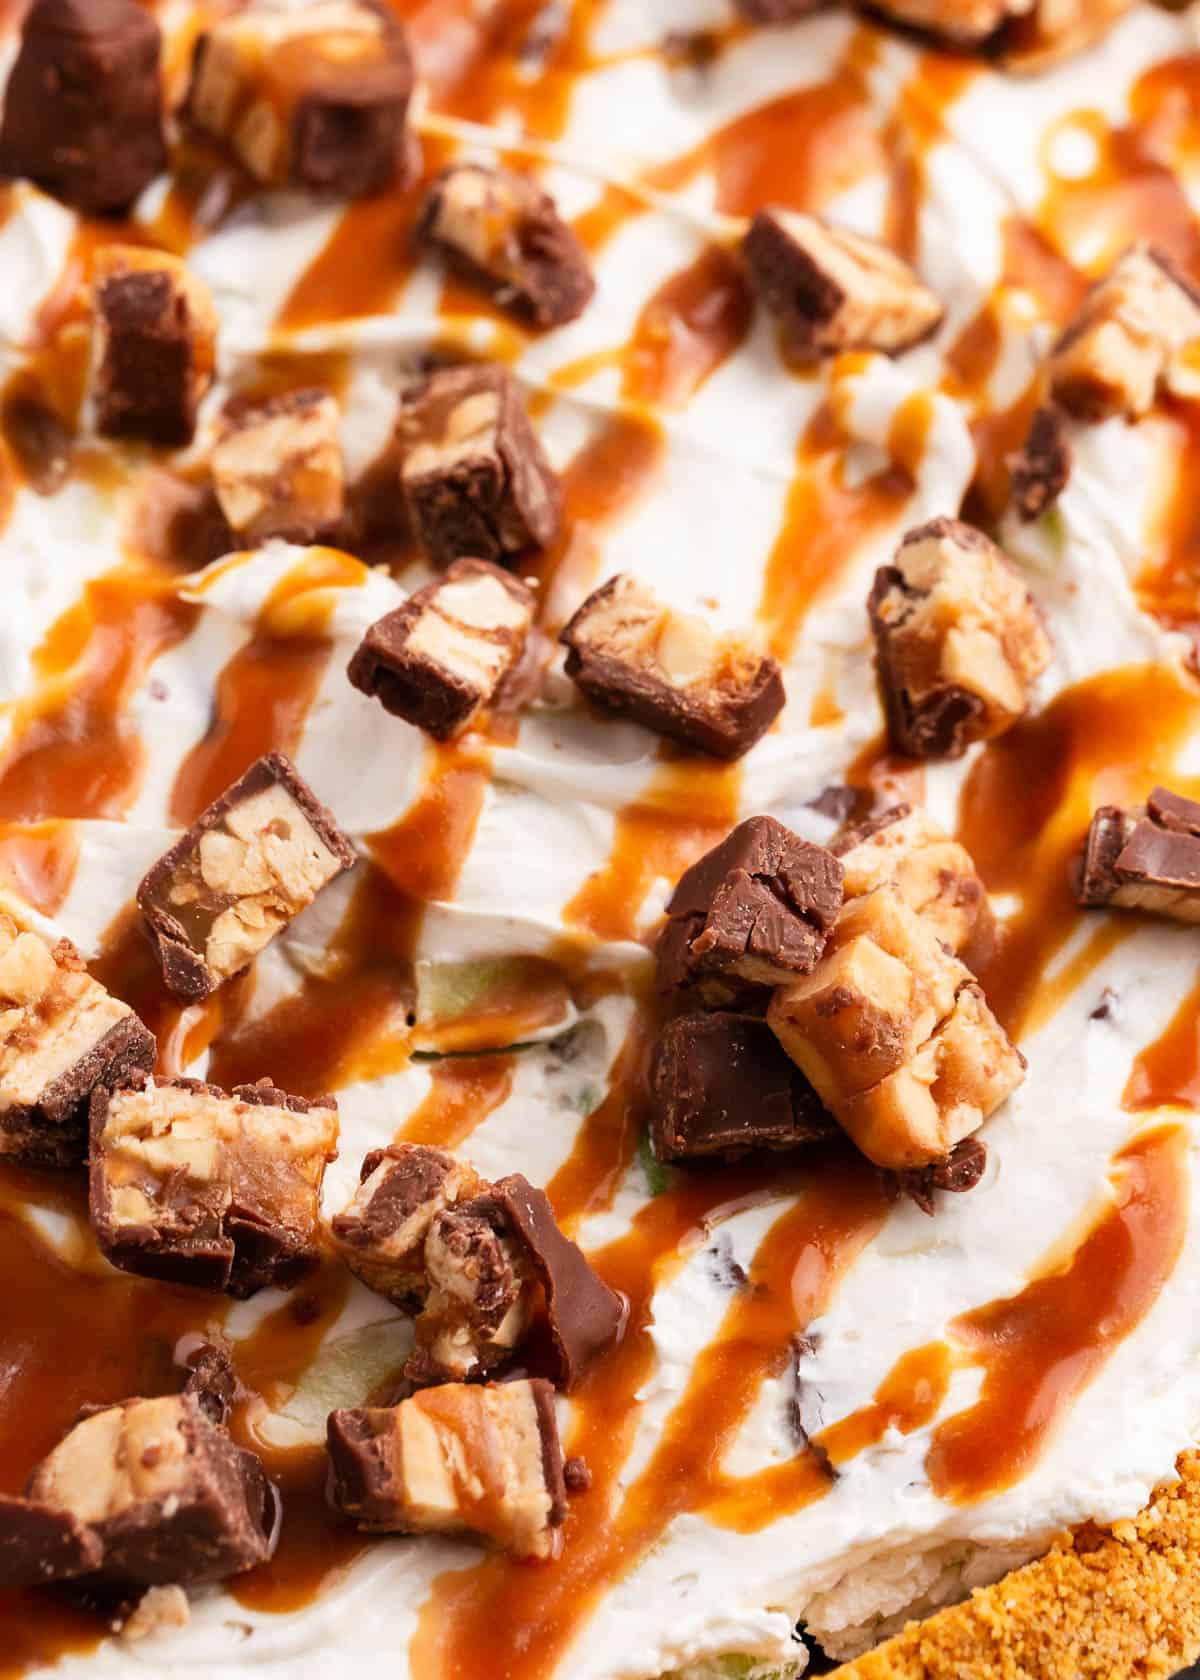 Snickers and caramel on top of pie.